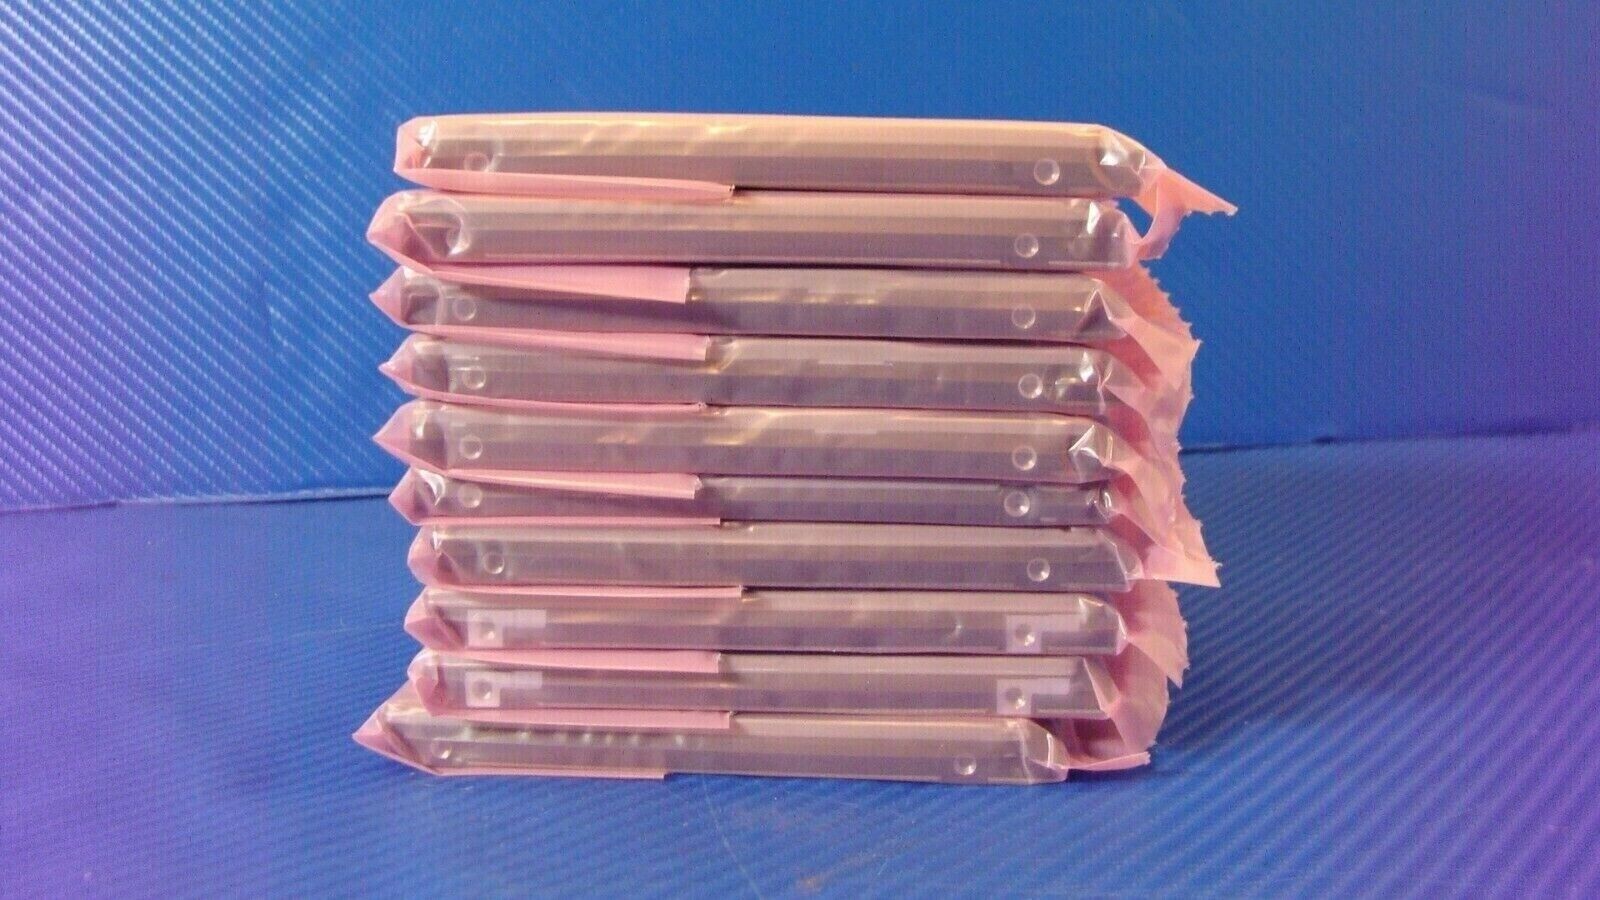 LOT of 13 2.5 HDD Laptop Notebook SATA Hard Drive 9mm Mix Brand Tested